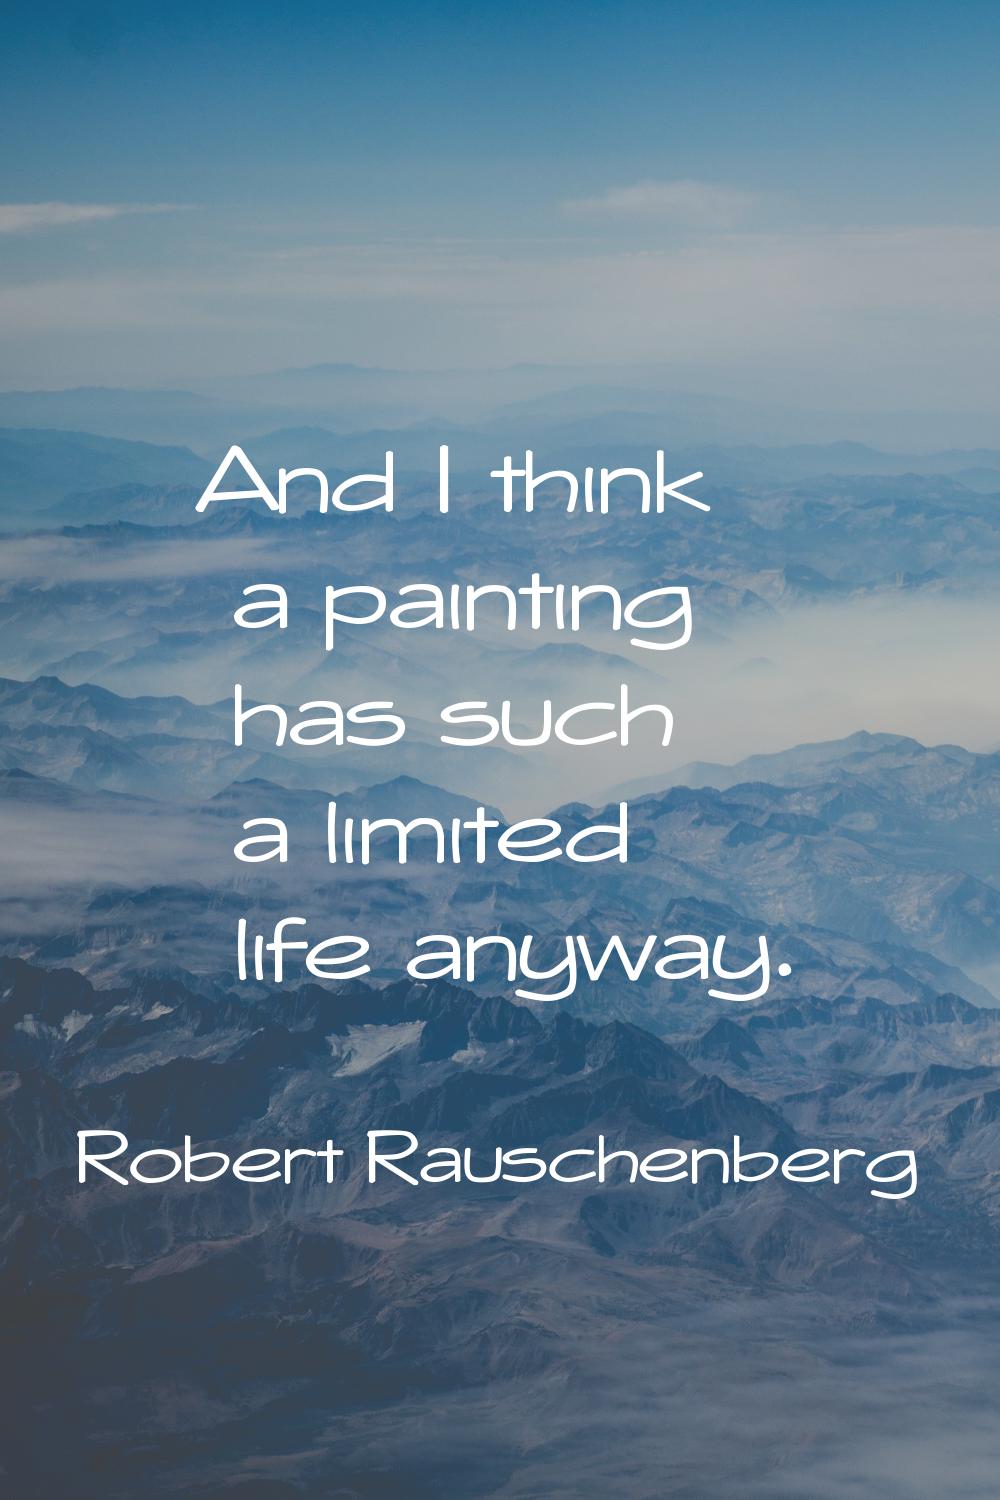 And I think a painting has such a limited life anyway.